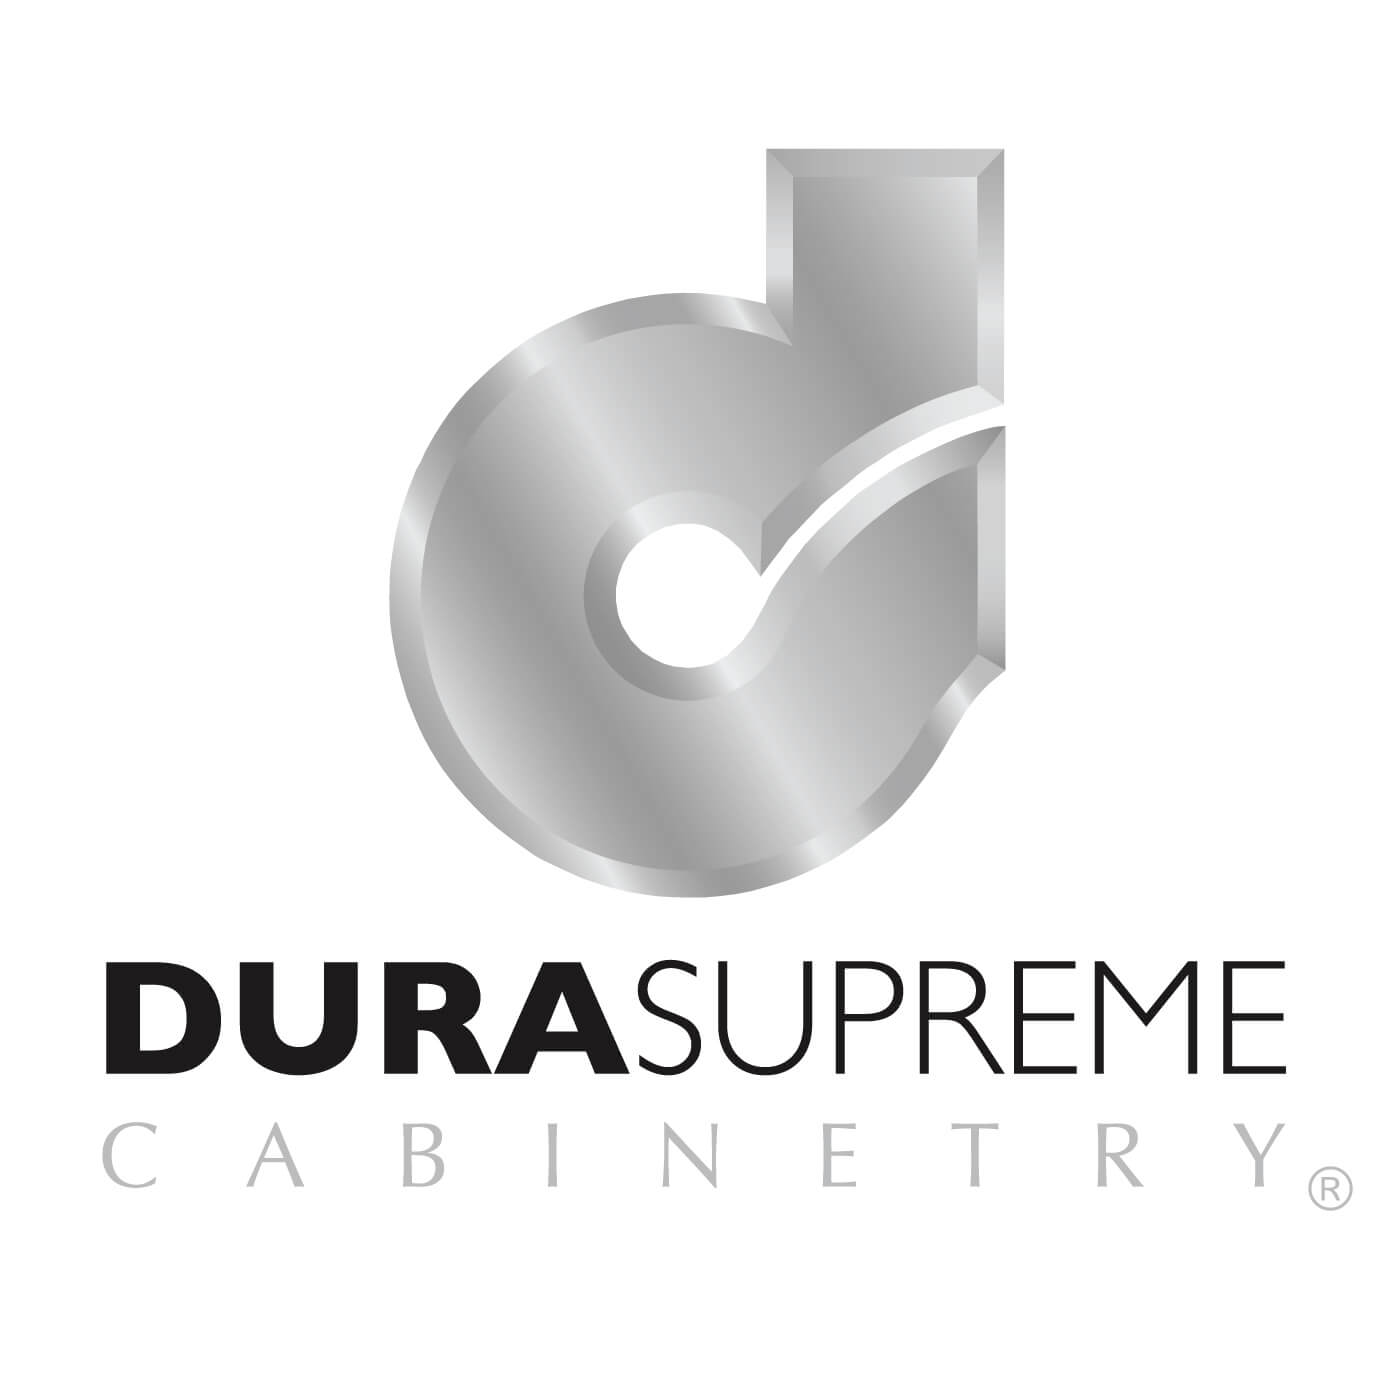 Dura Supreme Cabinetry Logo. An American-made semi-custom and custom cabinetry brand sold nationally.